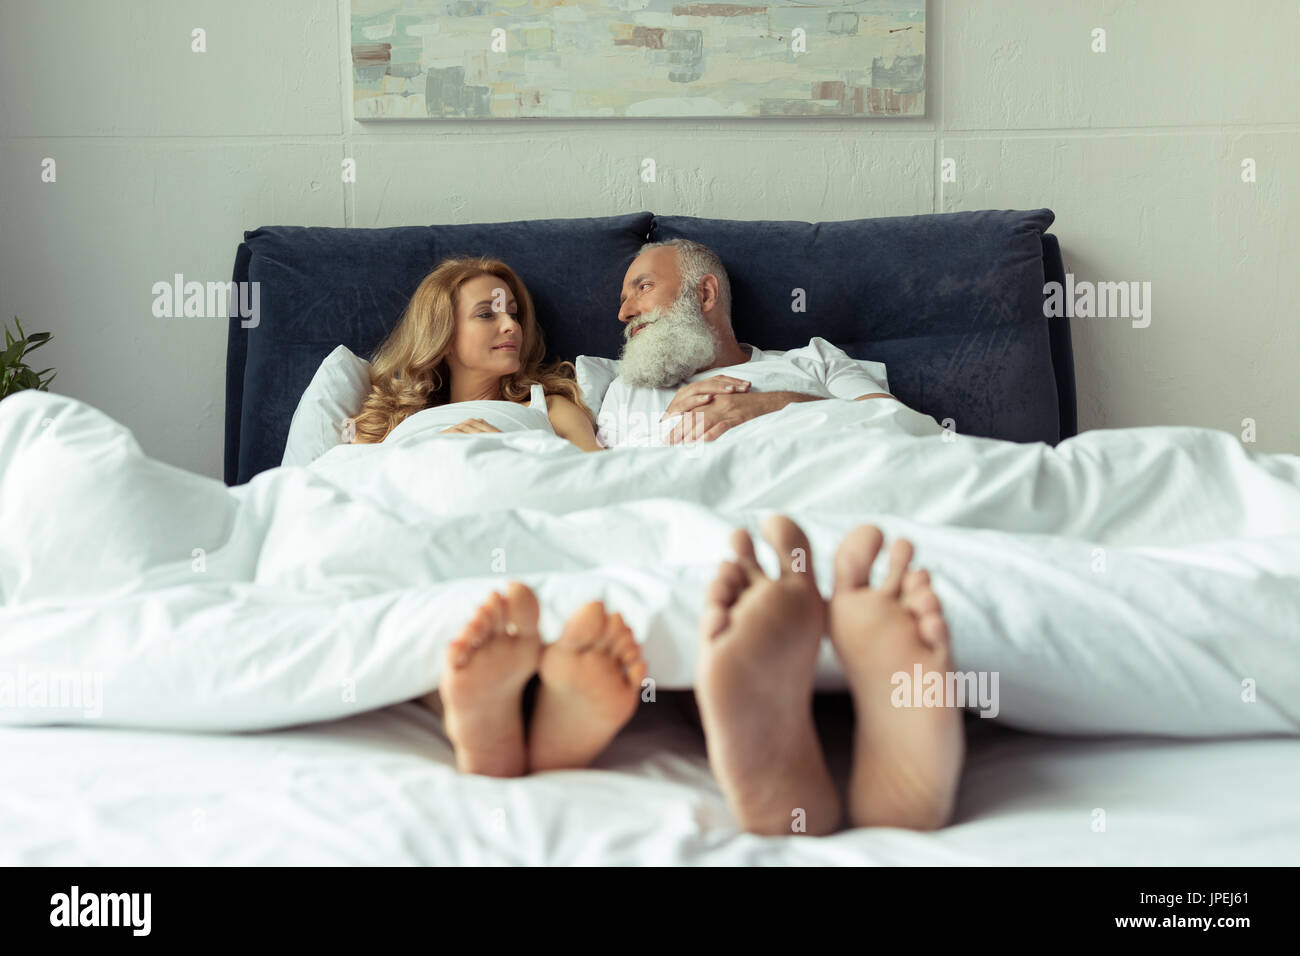 Close-up view of feet of happy mature couple resting together in bed  Stock Photo